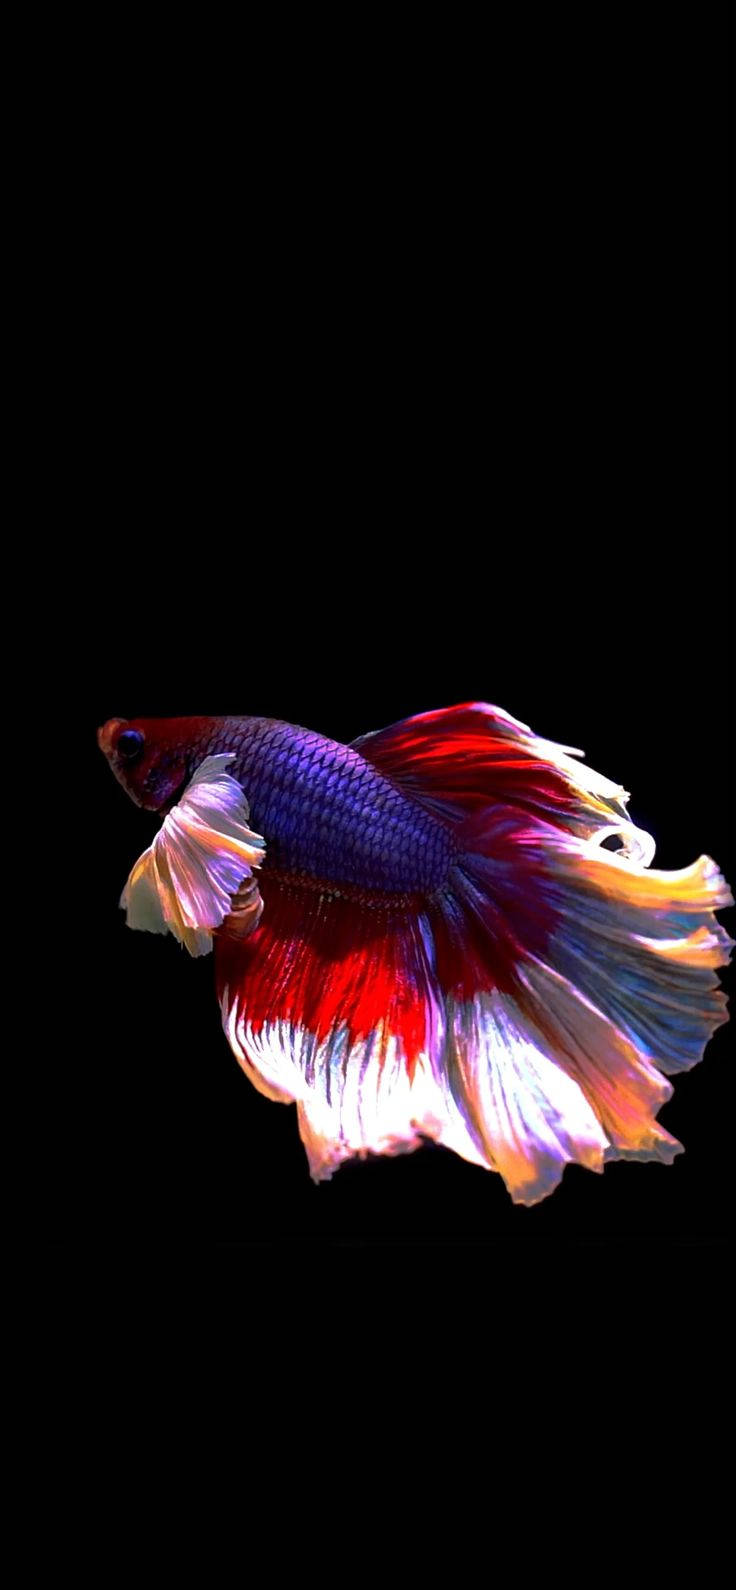 Colorful Siamese Fighting Fish Iphone Background